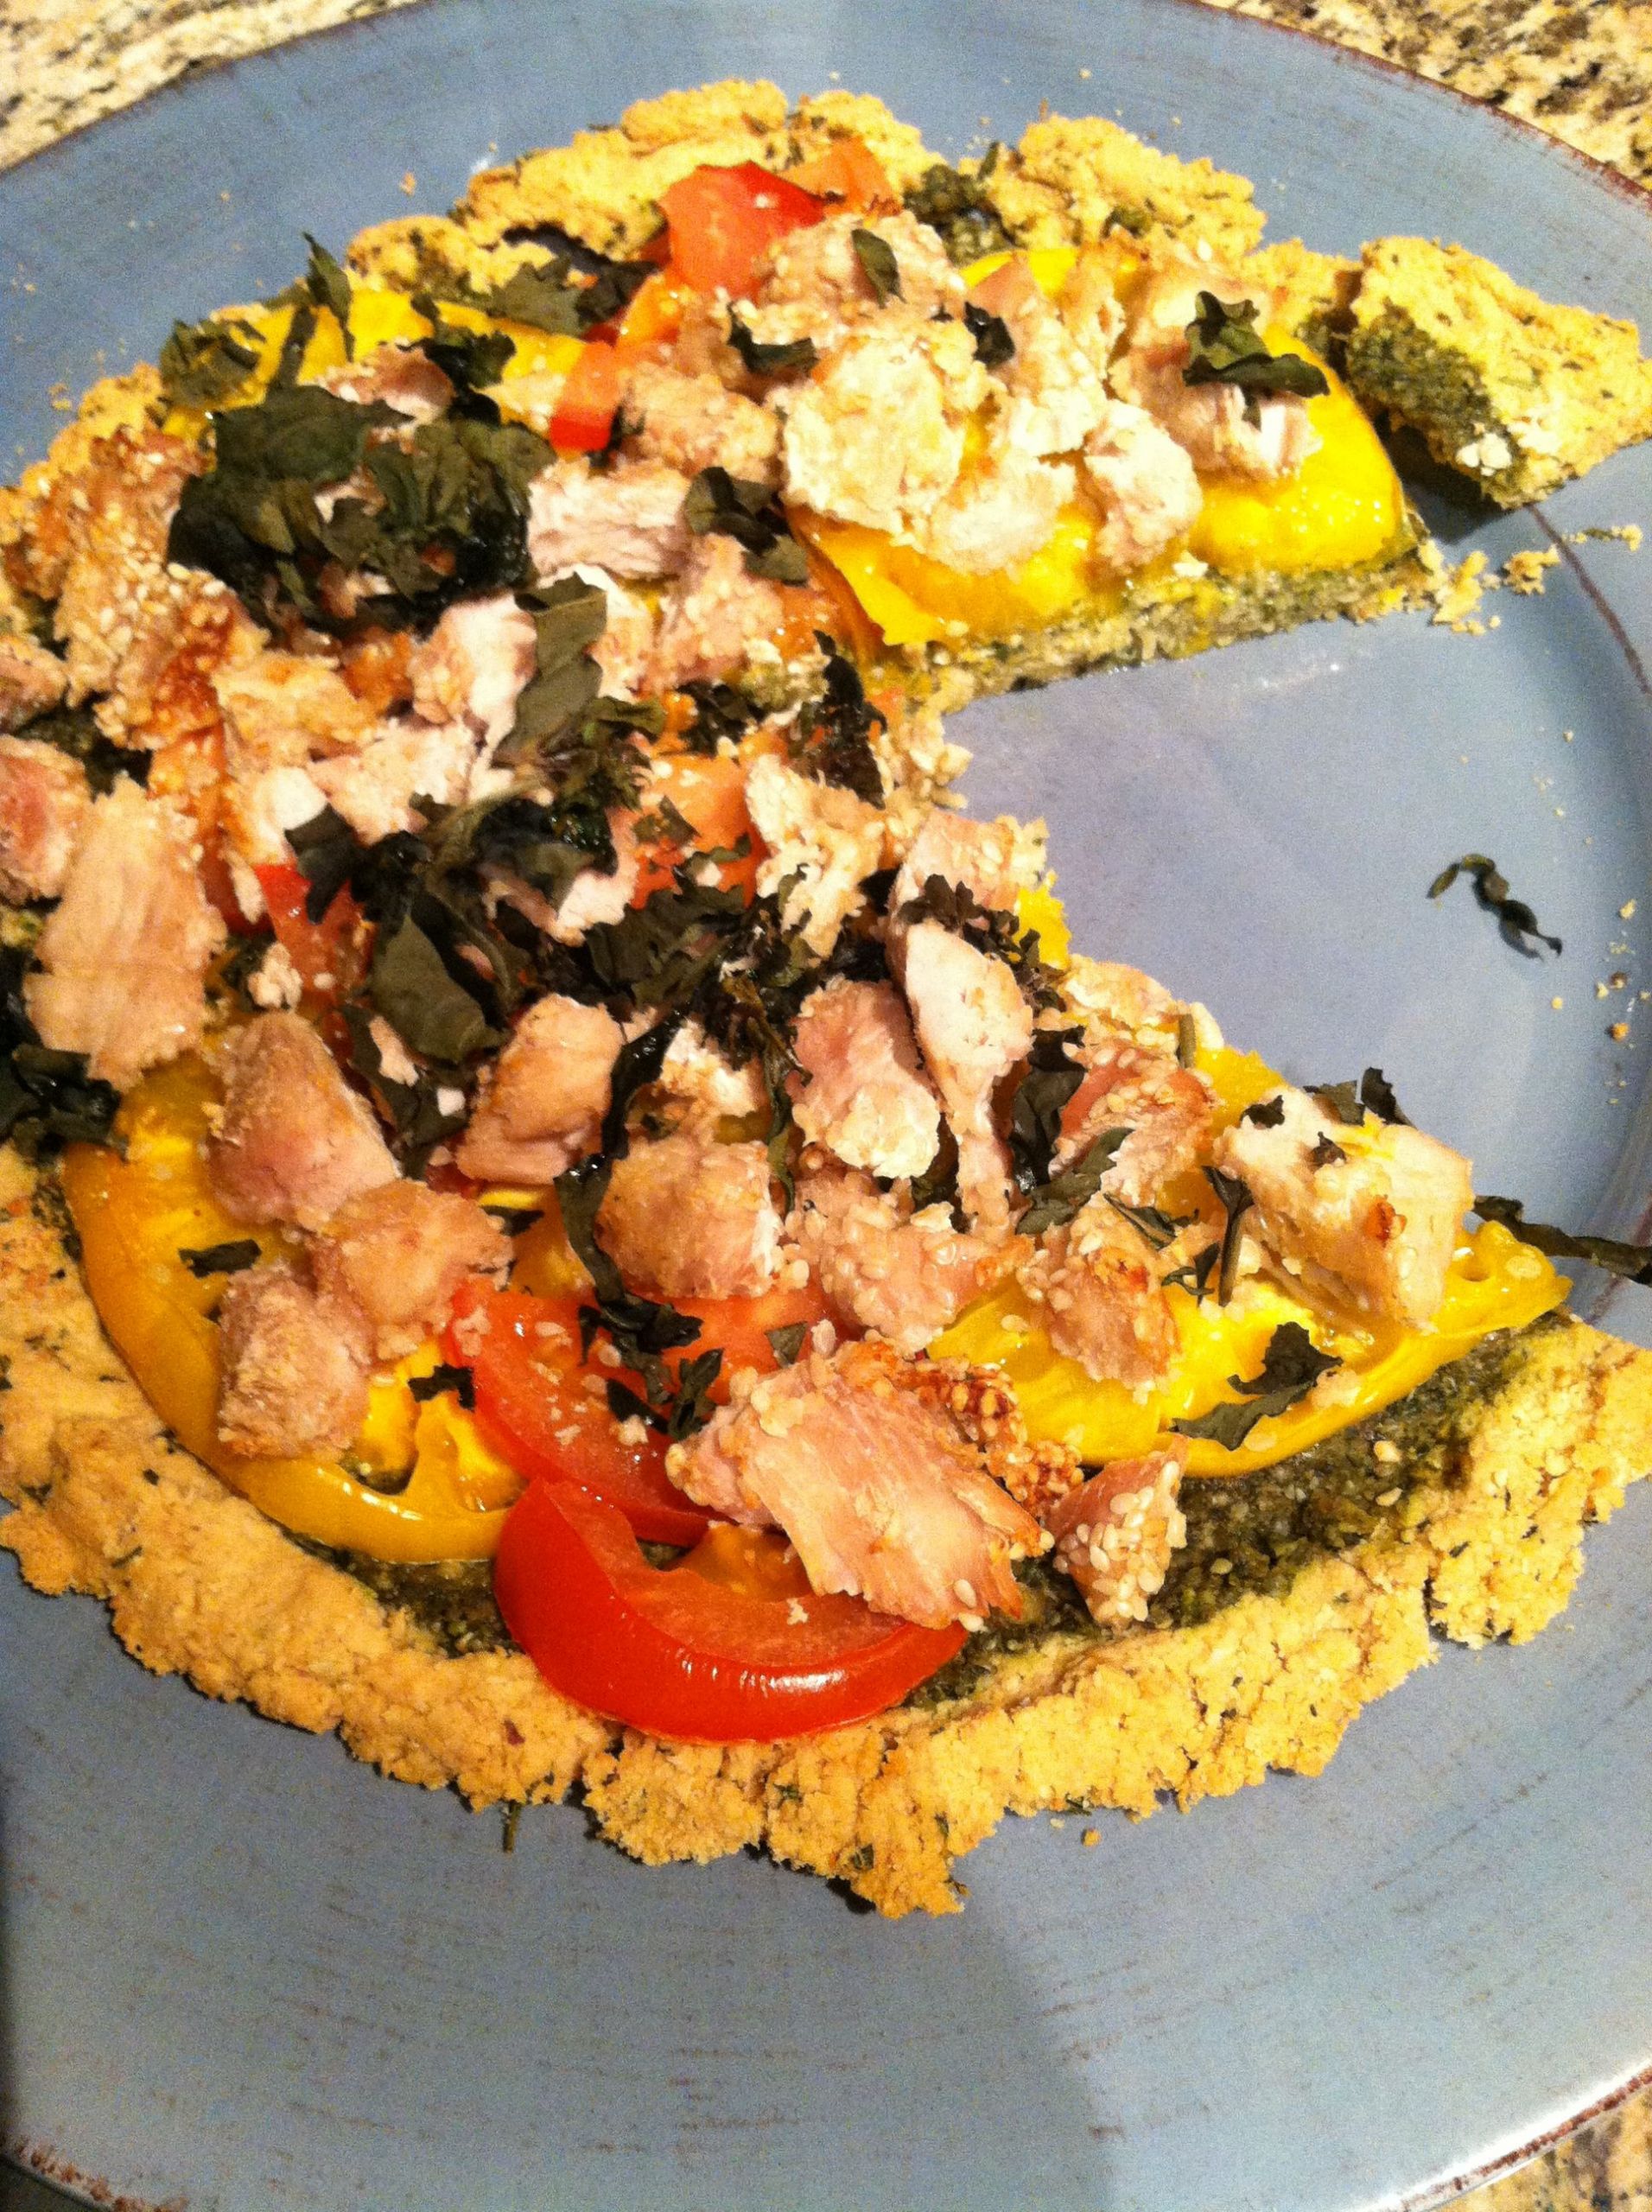 Gluten Free Pizza Dough Whole Foods
 Easy Gluten Free Herbed Pizza Crust topped with Sesame